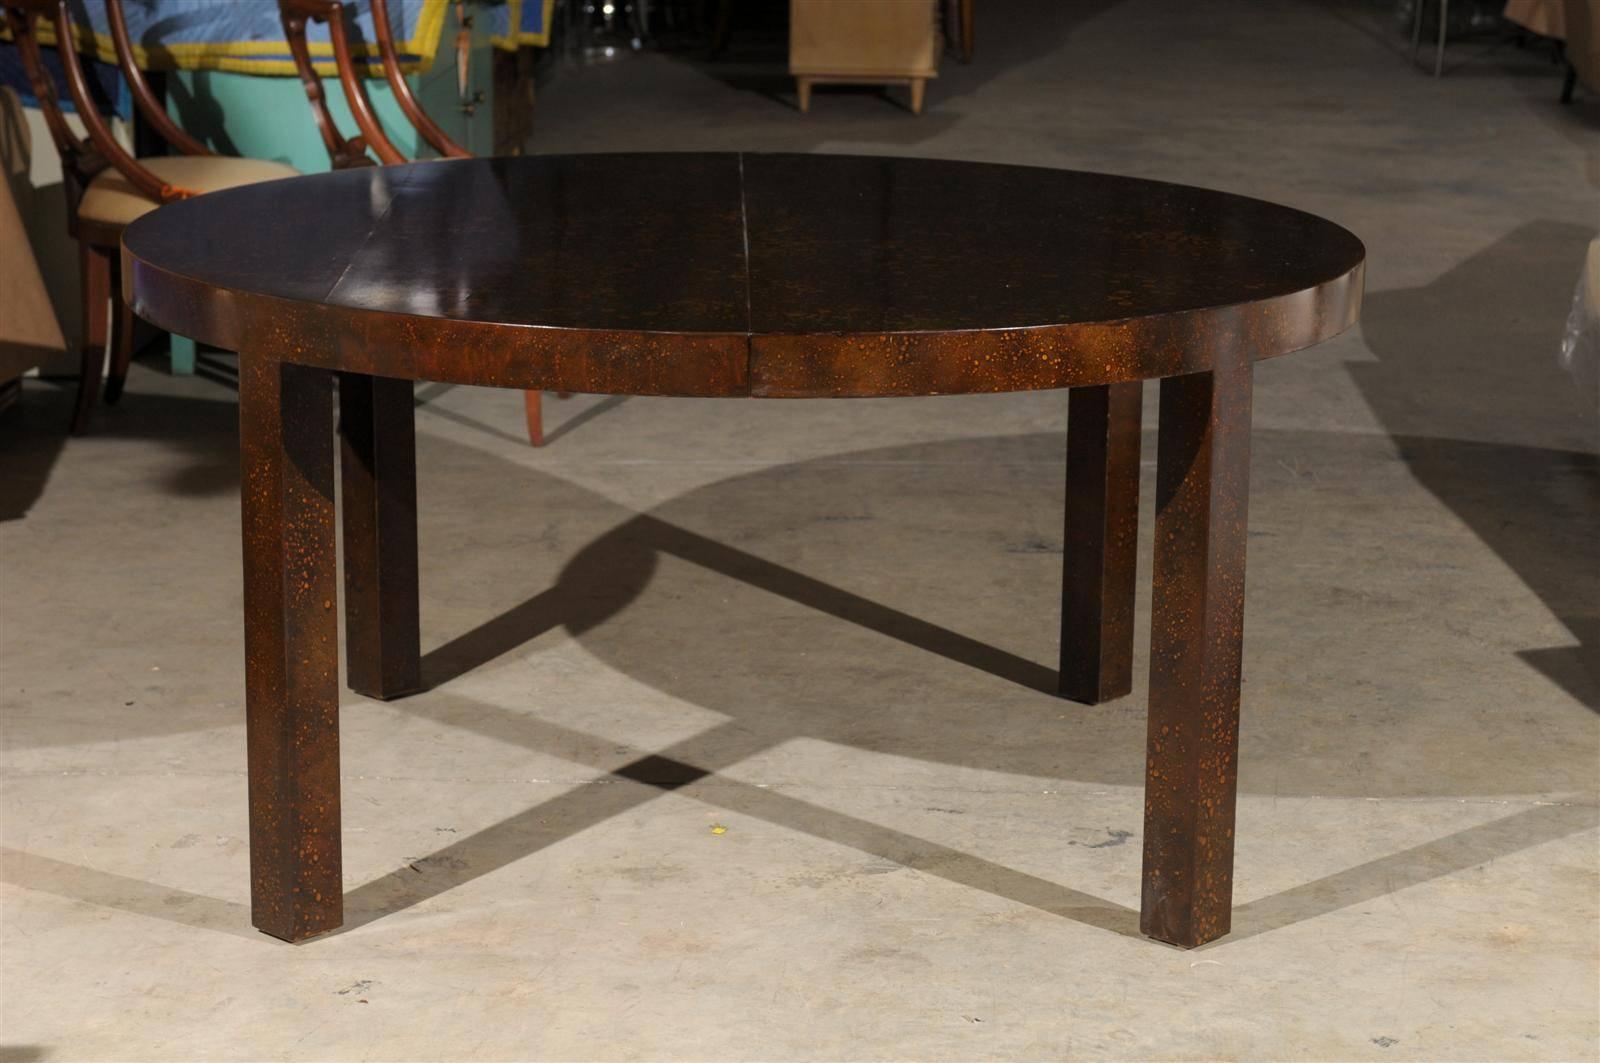 Hardwood Vintage Round Parsons Style Faux Tortoiseshell Dining Table or Console